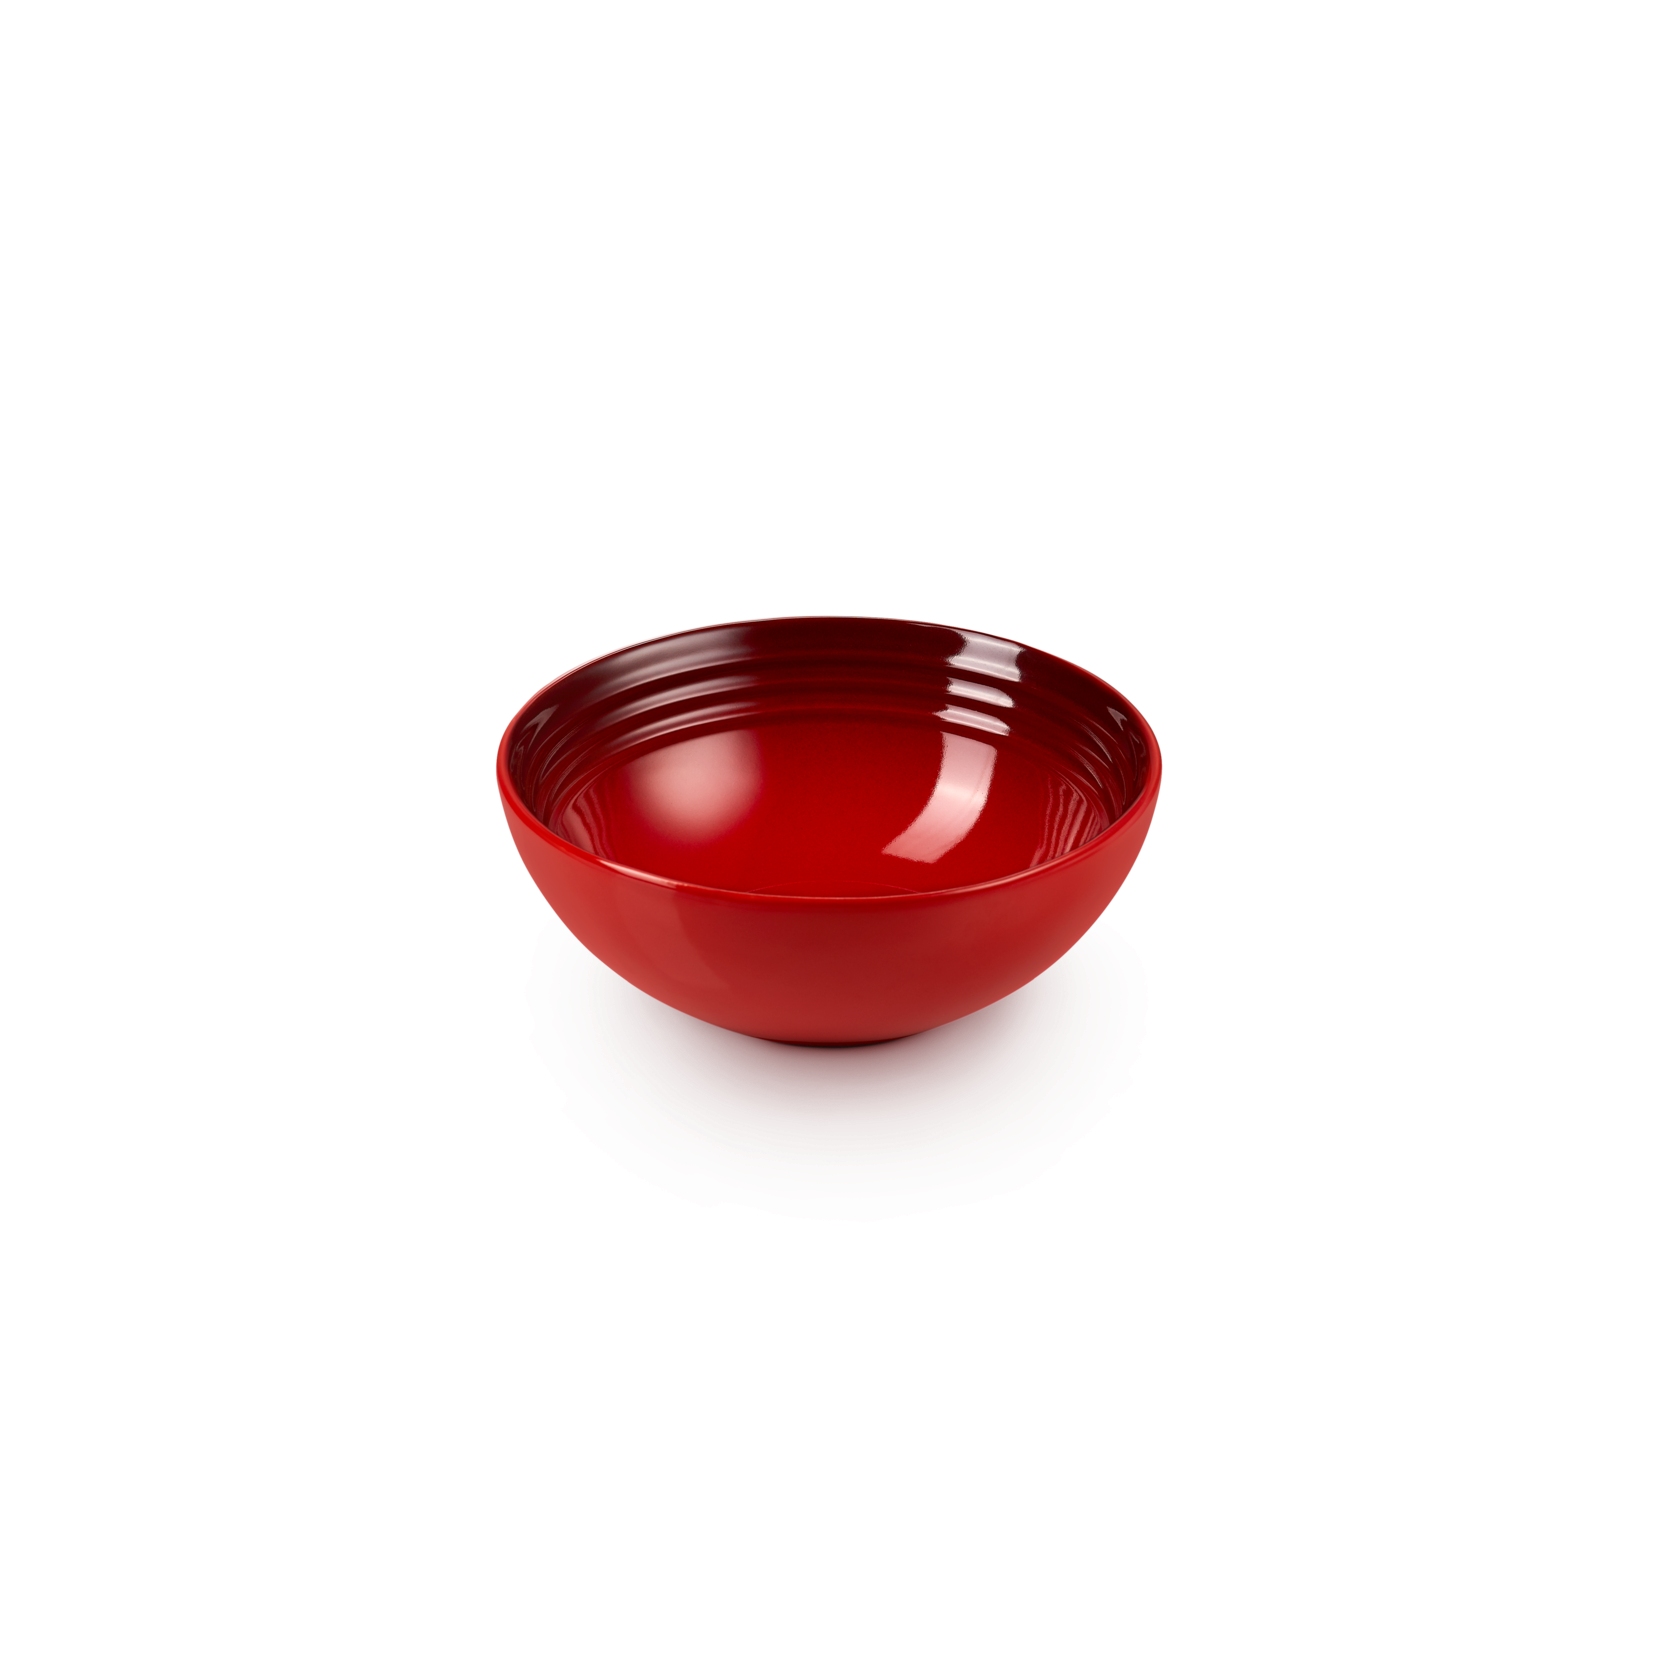 https://www.tattahome.com/51658-thickbox_default/le-creuset-cereal-bowl-vancouver-cherry.jpg